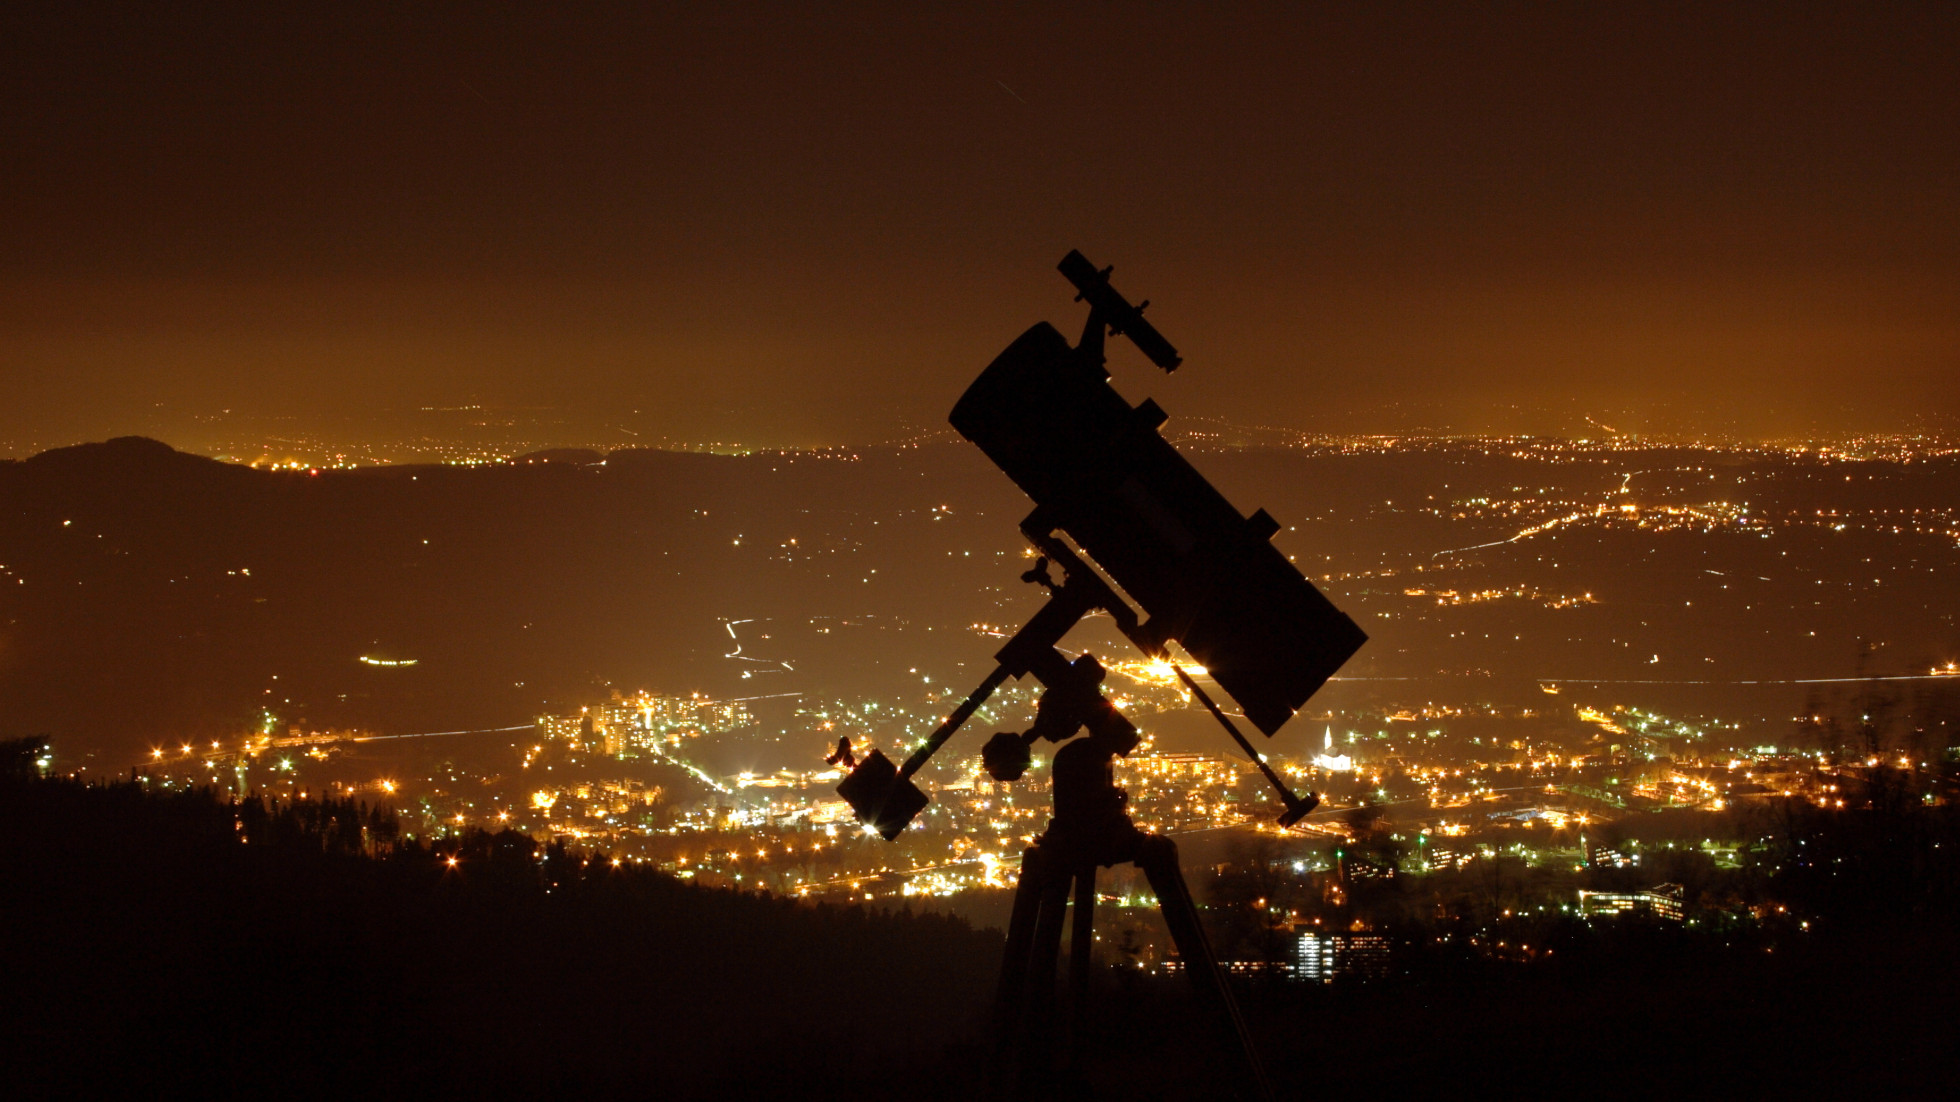 Observing undisturbed by light pollution